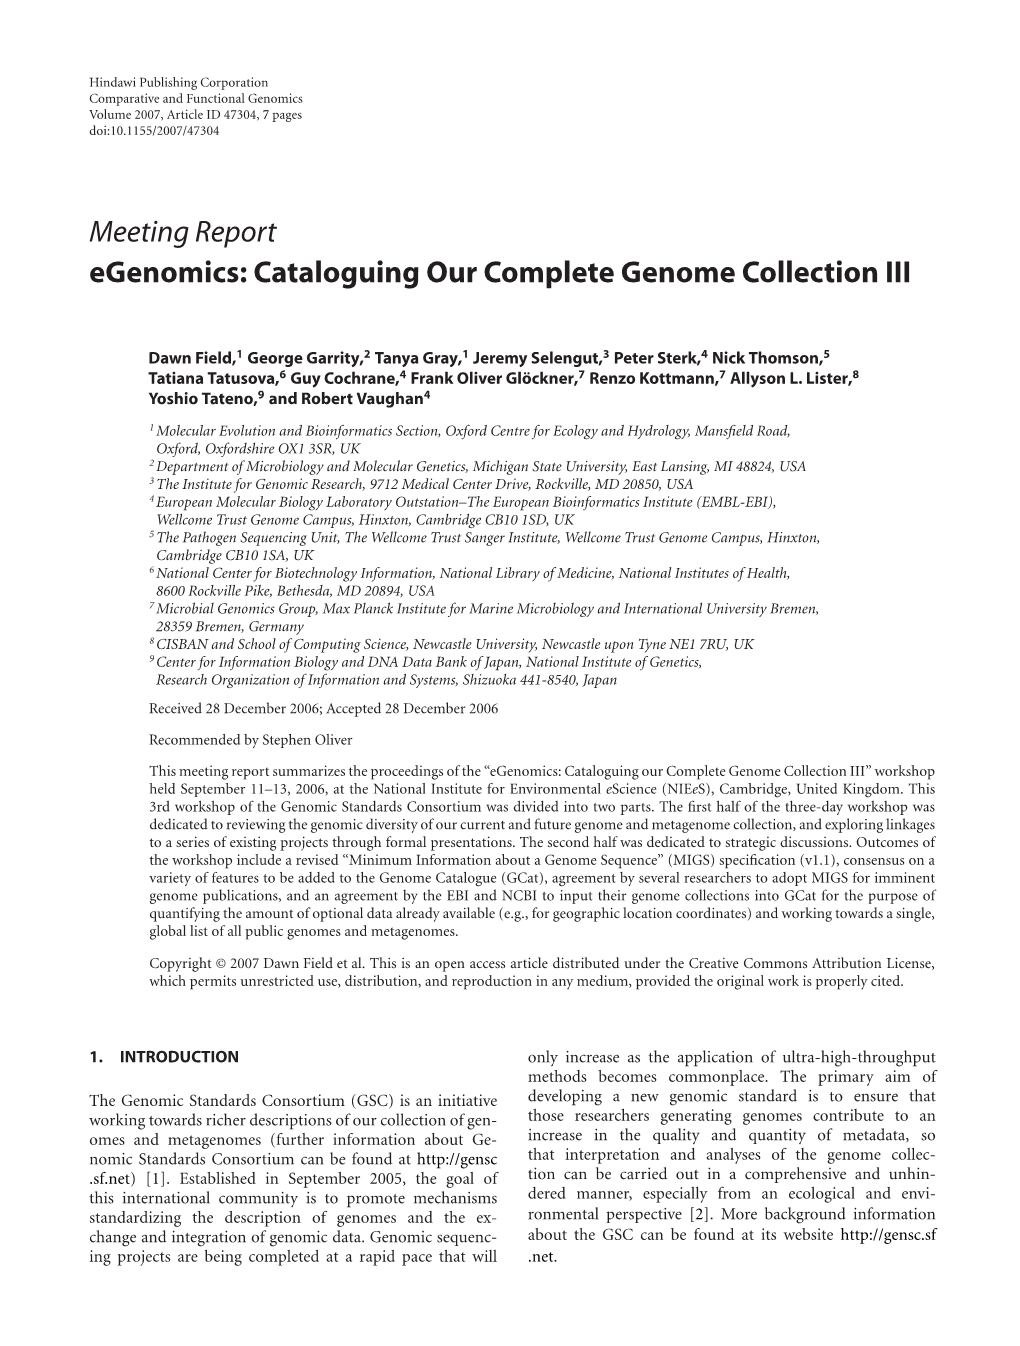 Egenomics: Cataloguing Our Complete Genome Collection III